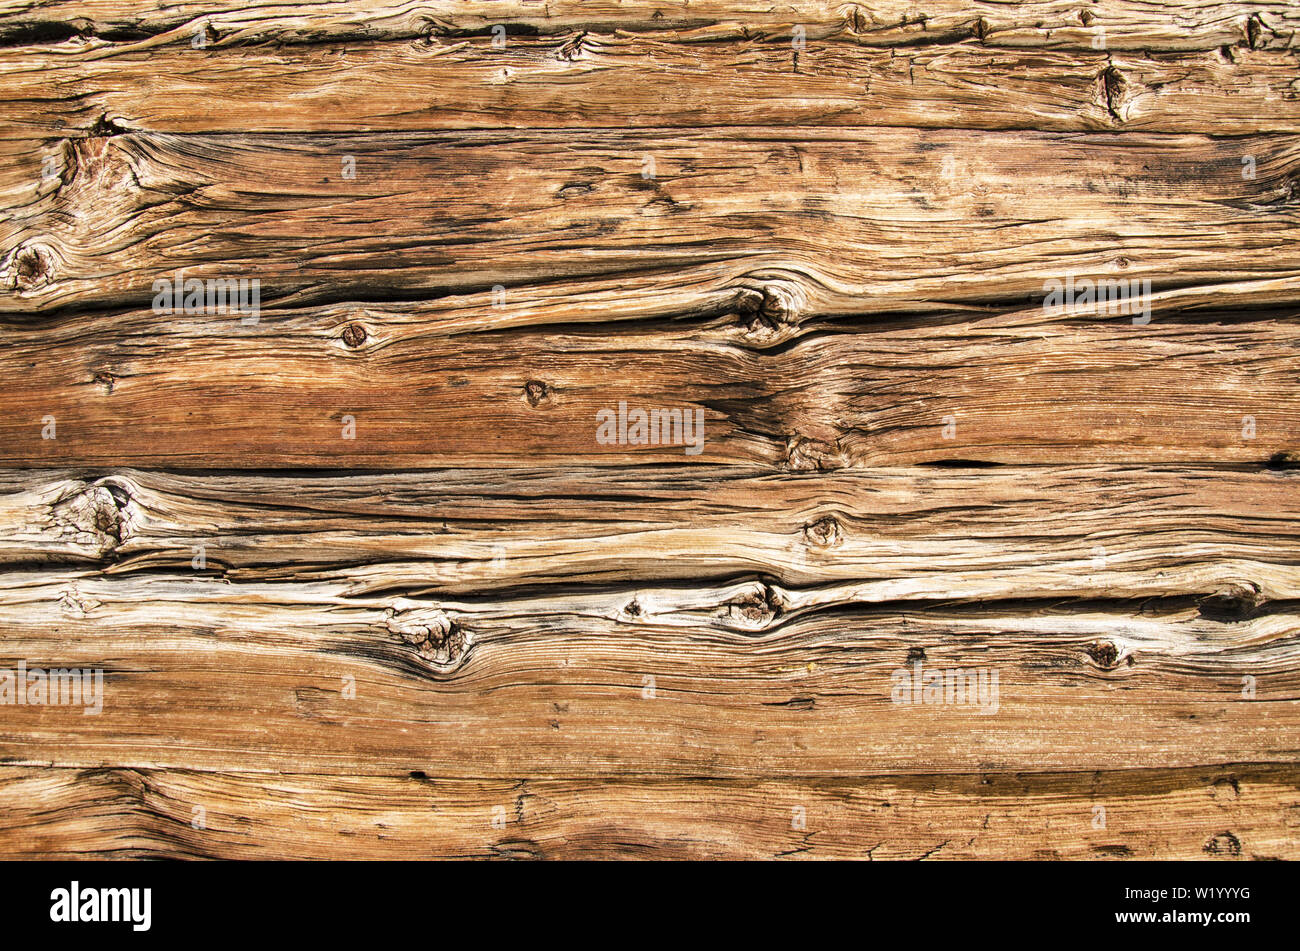 aged wooden planks texture worn down by the sun and water Stock Photo